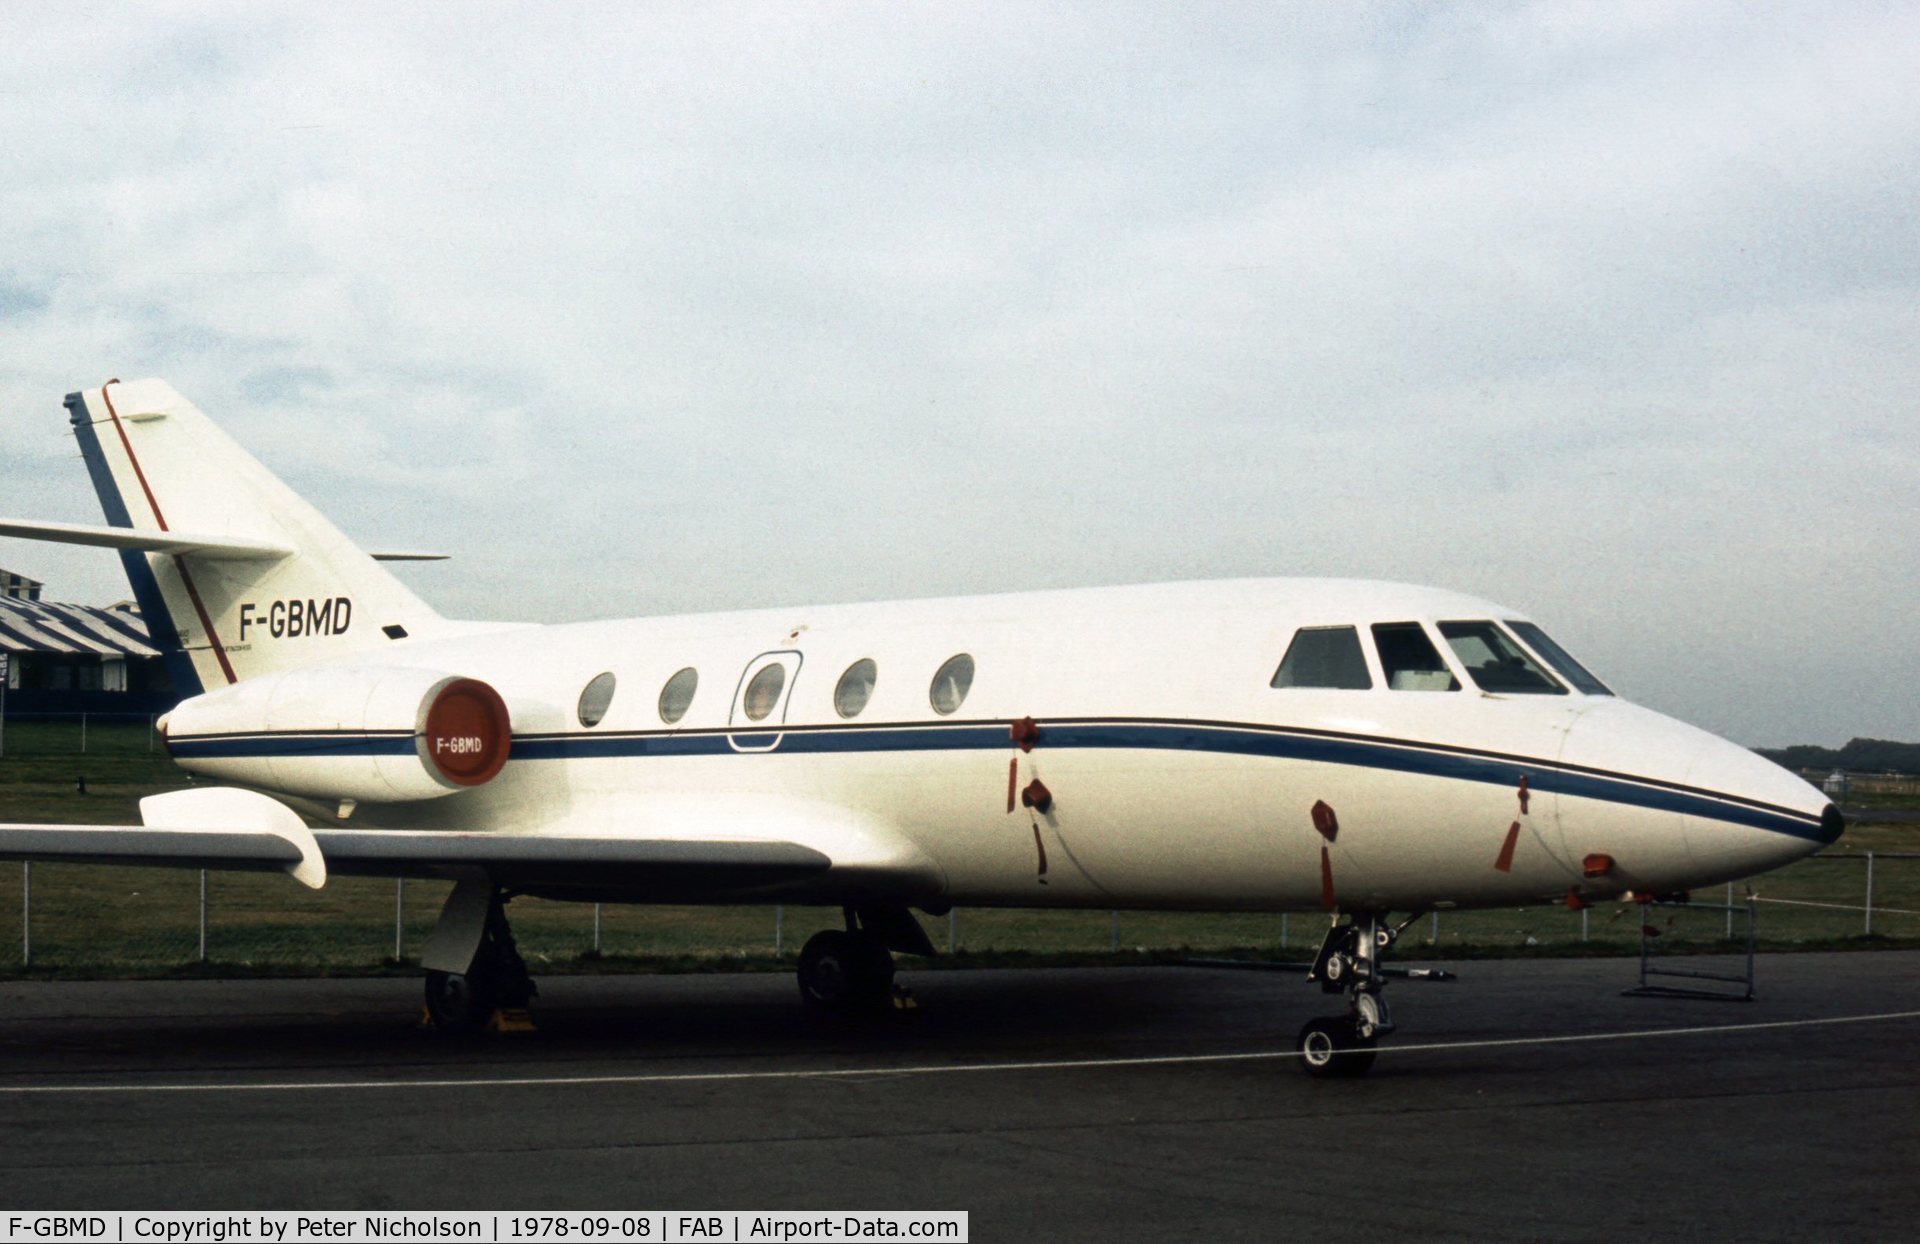 F-GBMD, 1978 Dassault Falcon (Mystere) 20F C/N 375, Falcon 20 on display at the 1978 Farnborough Airshow.